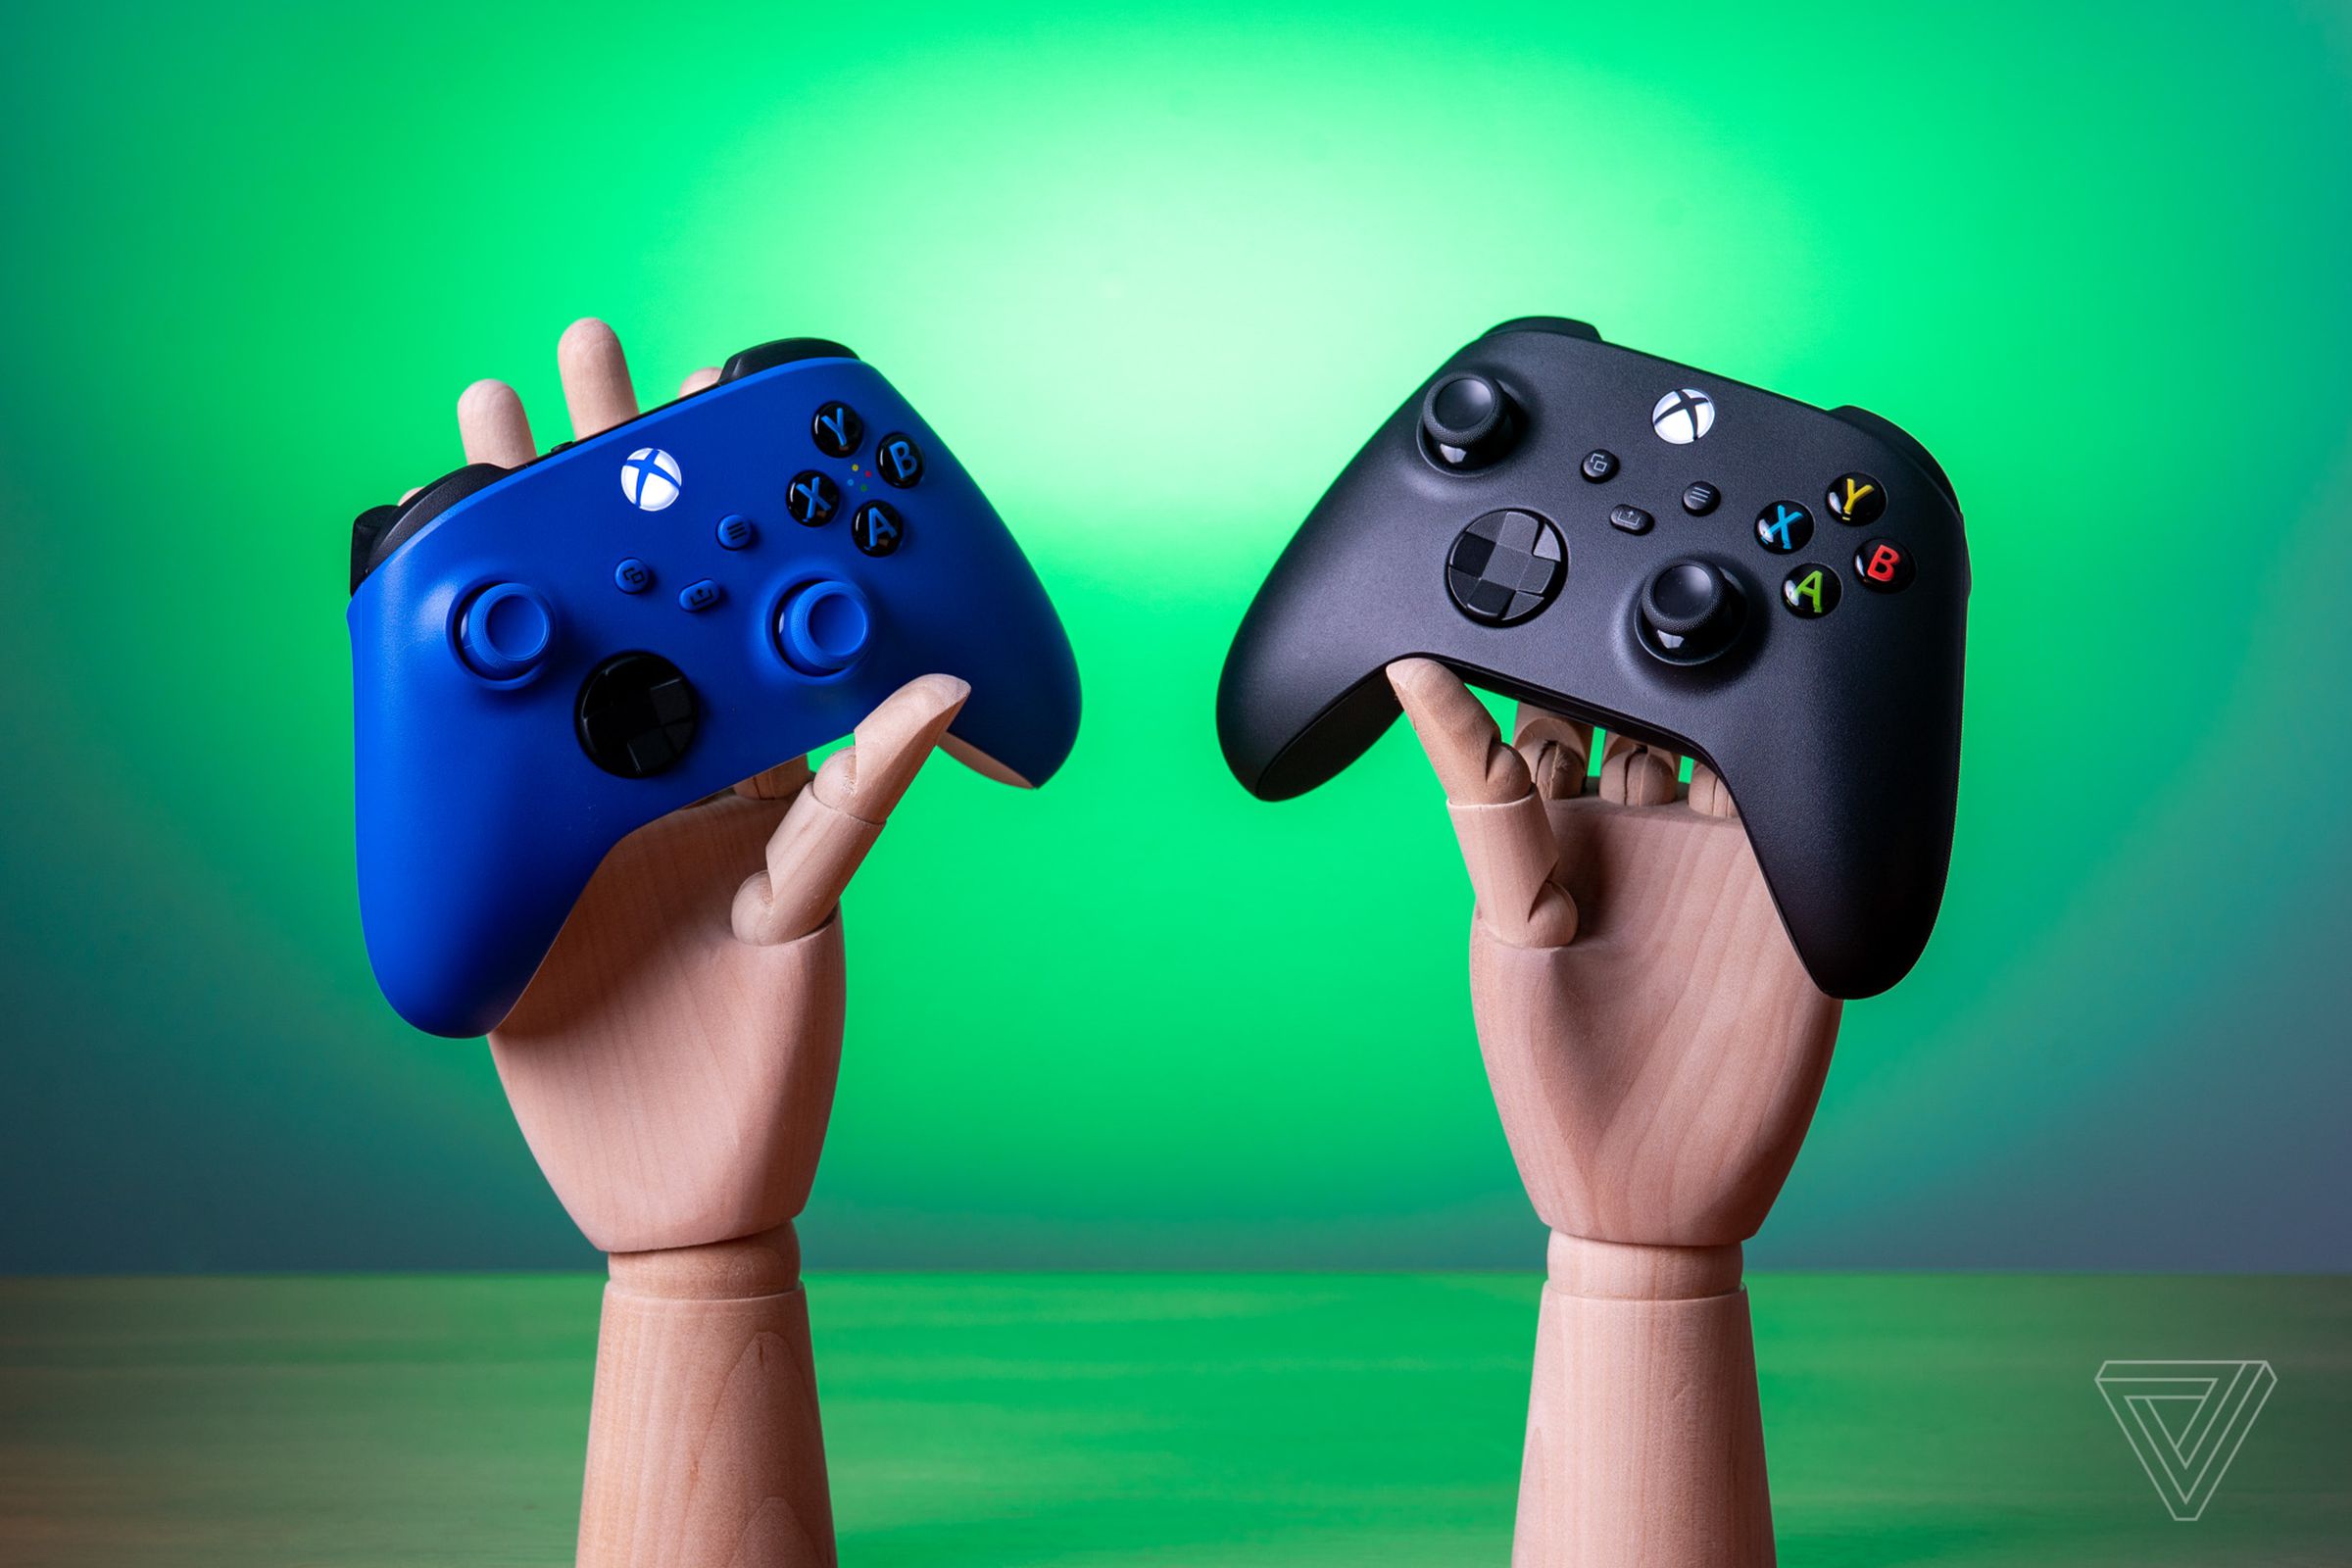 The standard Xbox controller looks great, feels great, plays great, and is available in cool colors.